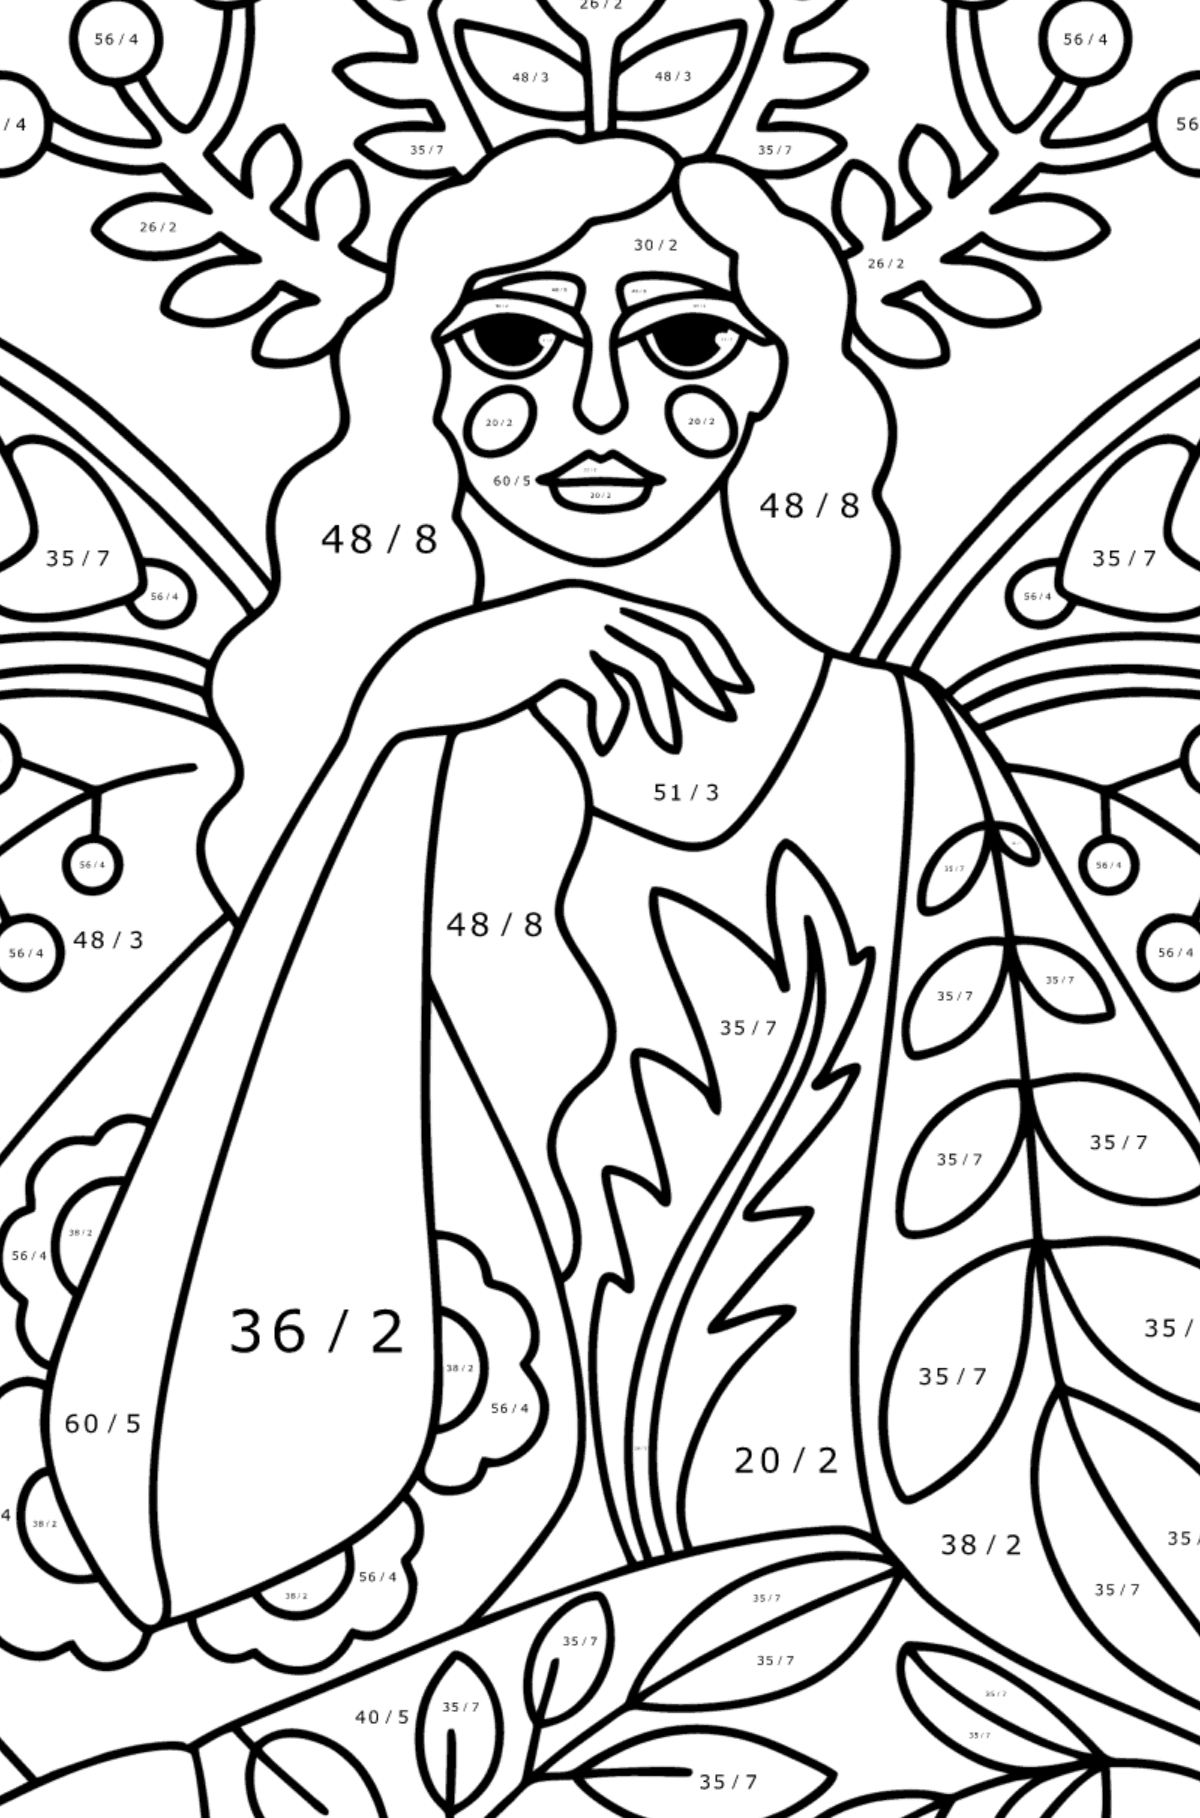 Fairy Tattoo (difficult) coloring page - Math Coloring - Division for Kids